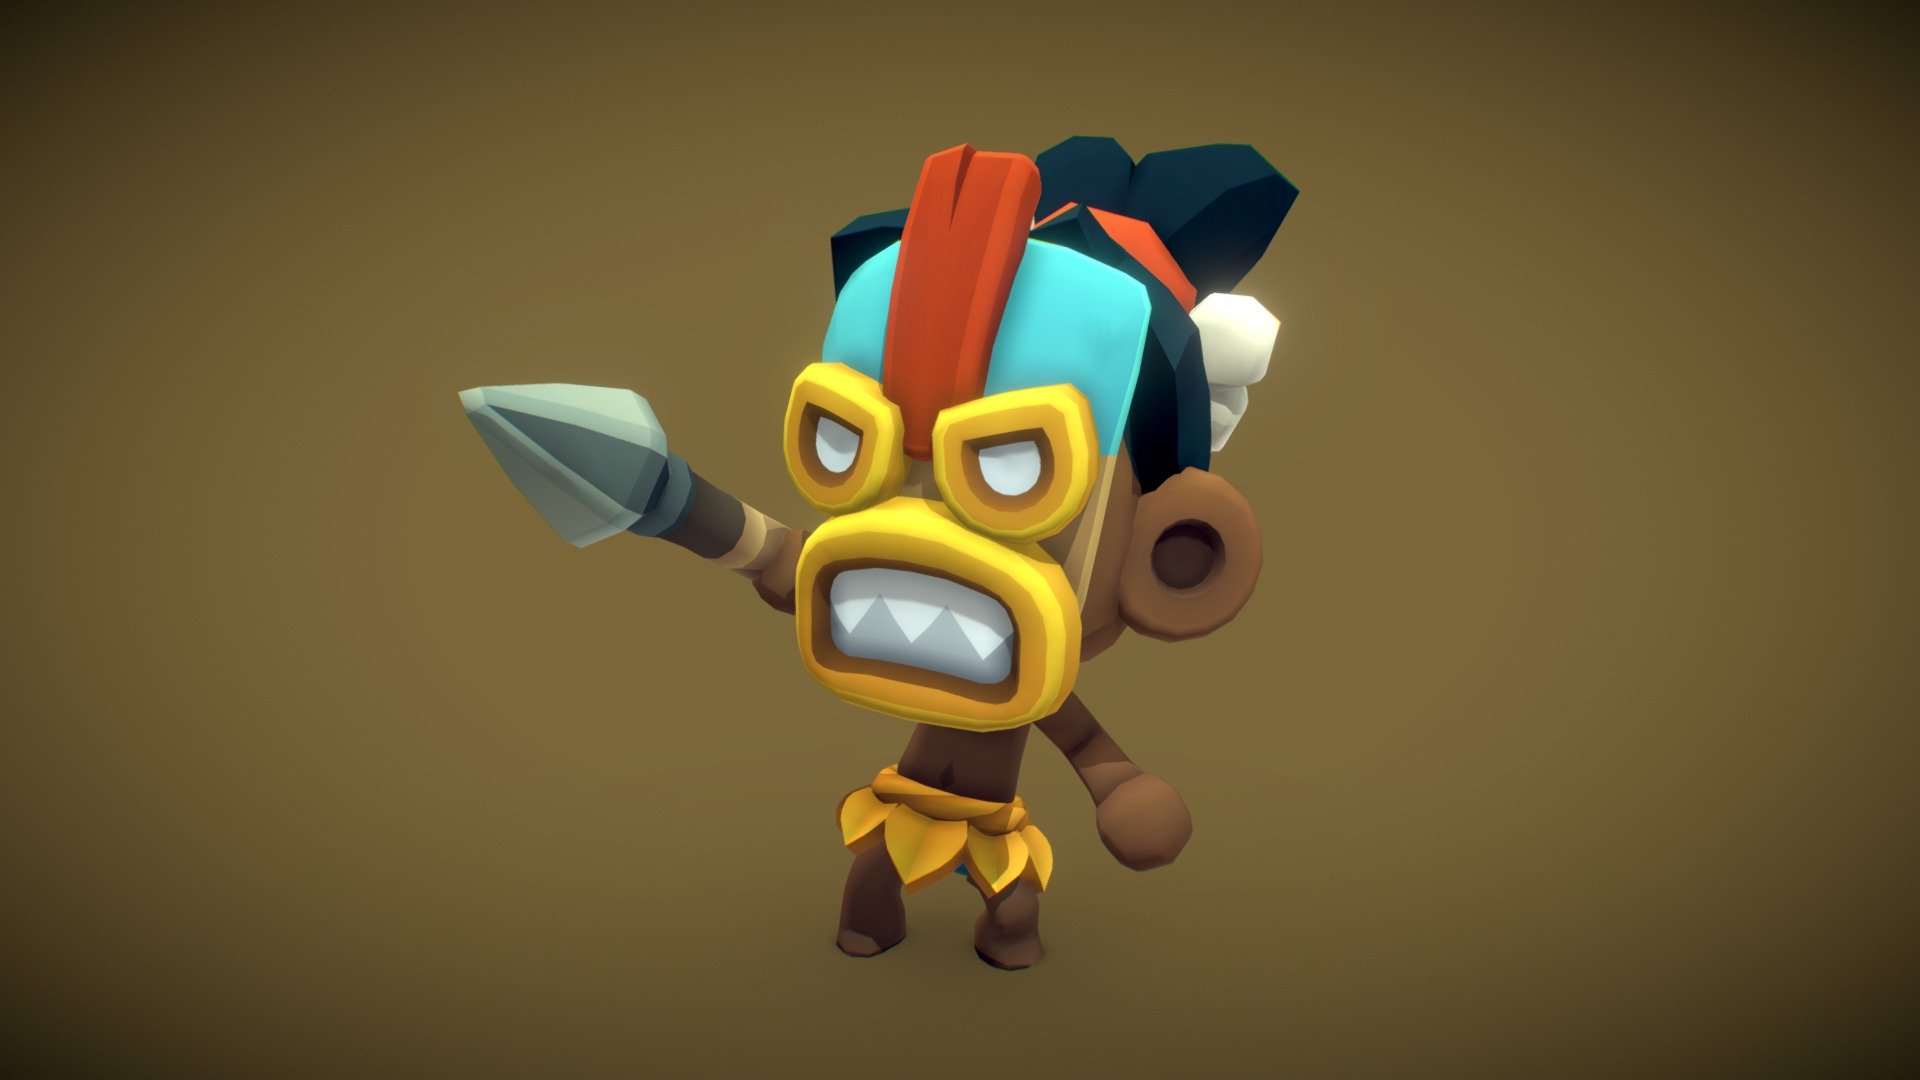 This little fella is part of the Jungle Theme Set.

This model is also included in the Cube World Full Set - Jungle Monster 2 - Proto Series - 3D model by BitGem 3d model